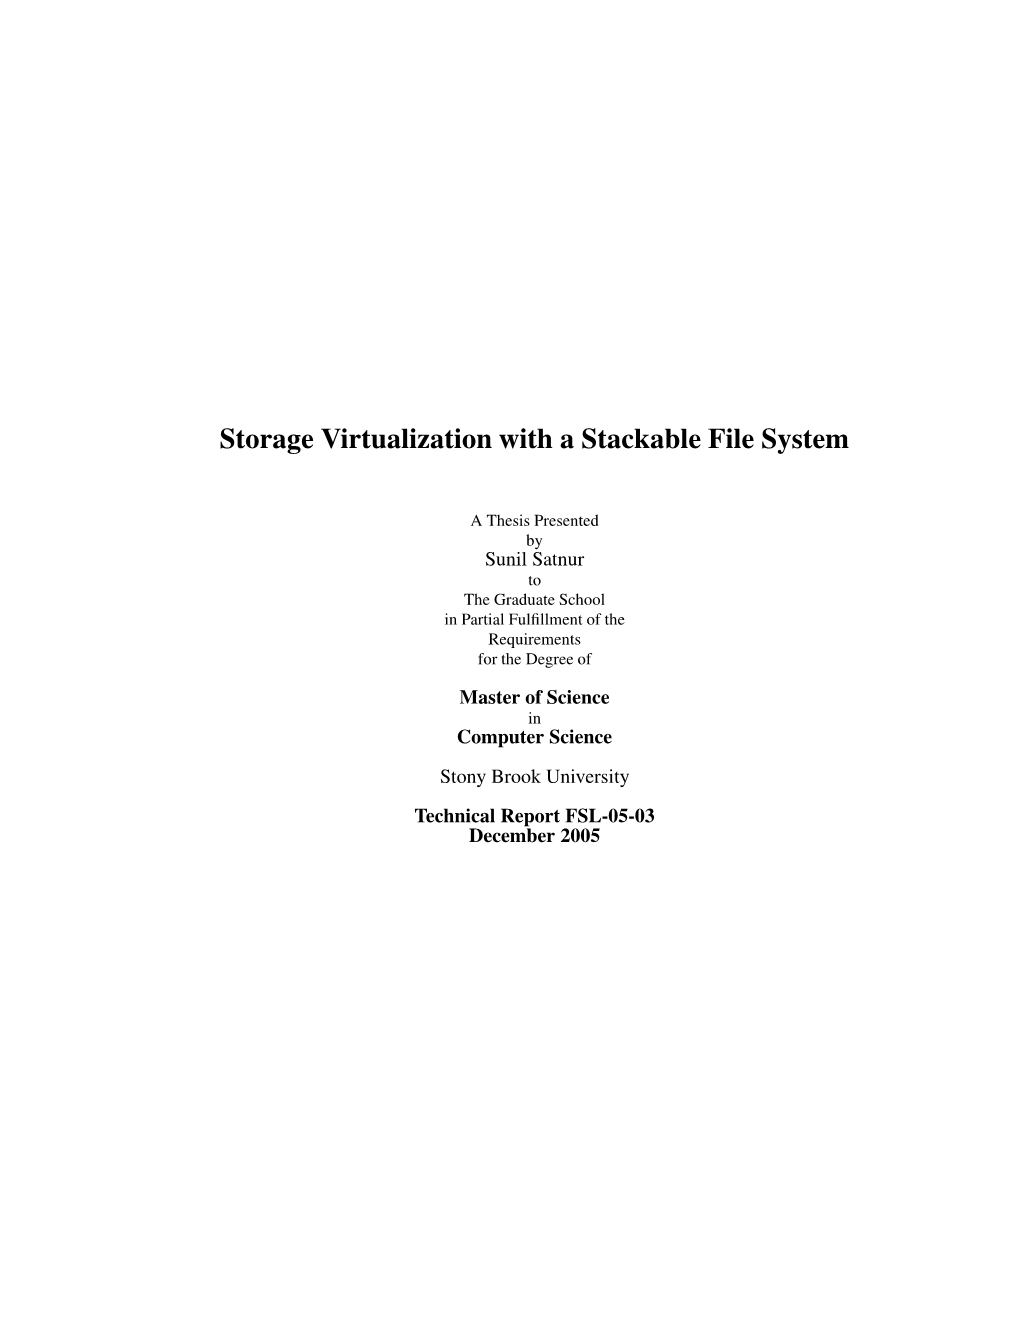 Storage Virtualization with a Stackable File System